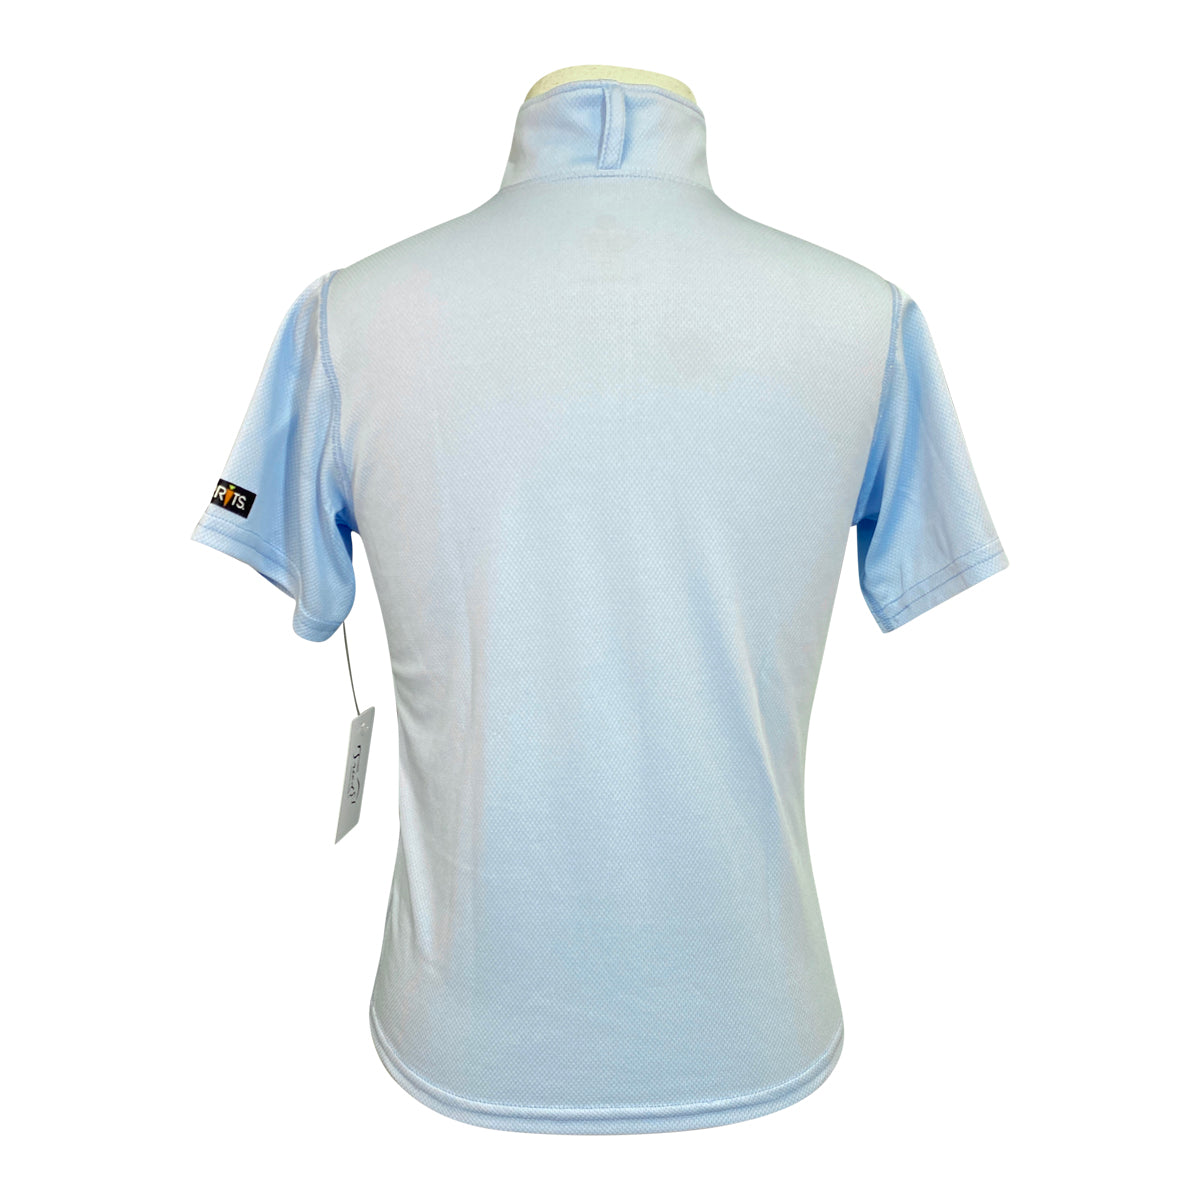 Kerrits 'Aire Ice Fil' Shirt in Light Blue